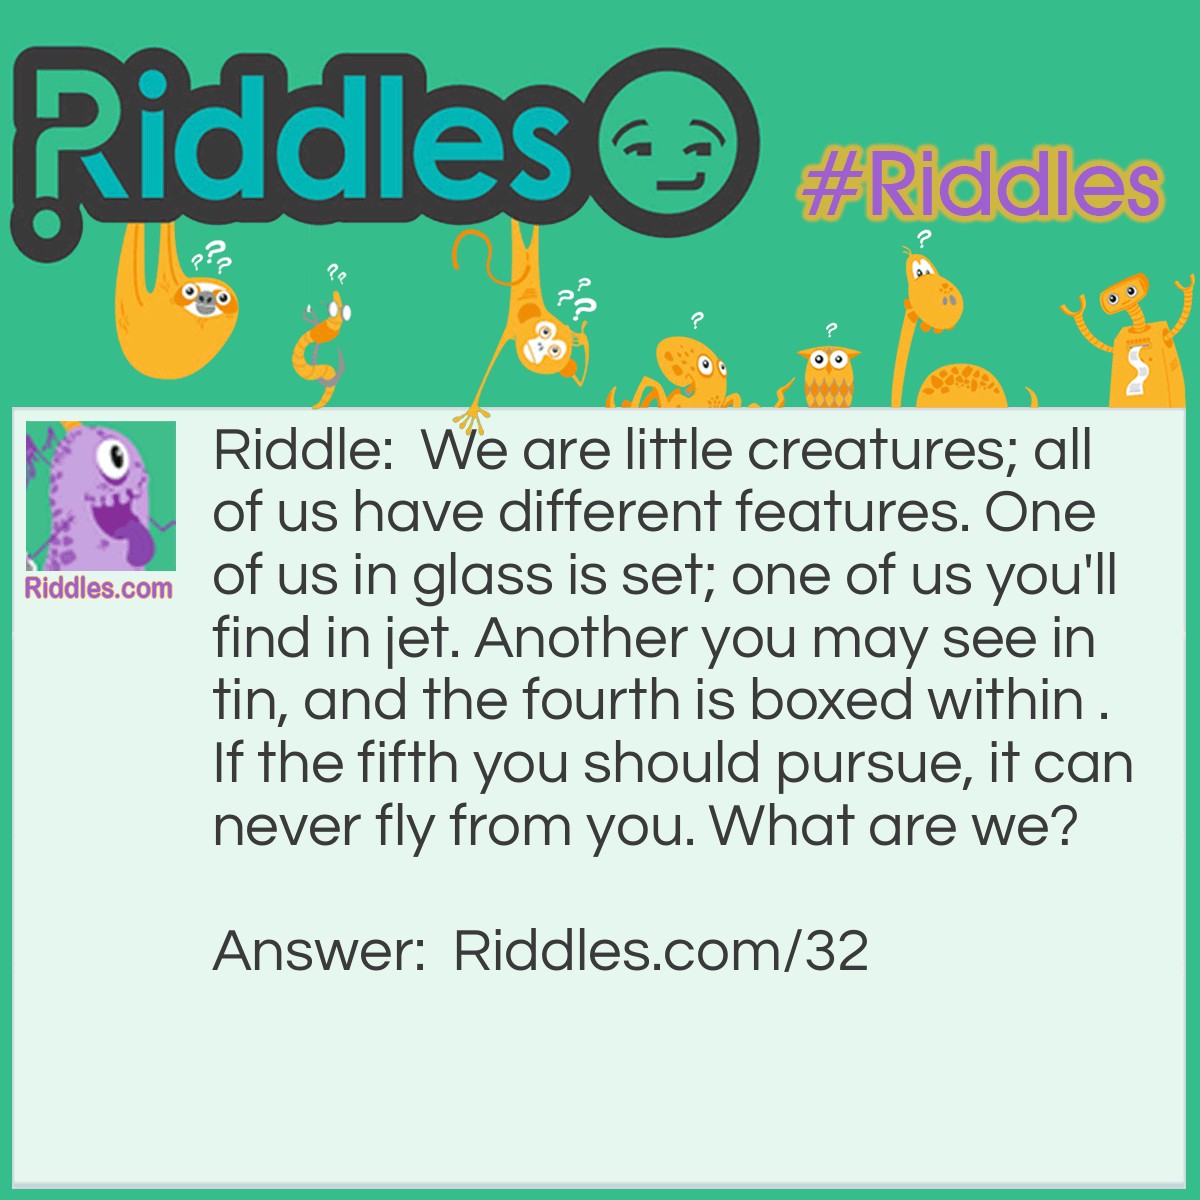 Riddle: We are little creatures; all of us have different features. One of us in glass is set; one of us you'll find in jet. Another you may see in tin, and the fourth is boxed within. If the fifth you should pursue, it can never fly from you. What are we? Answer: We are vowels.